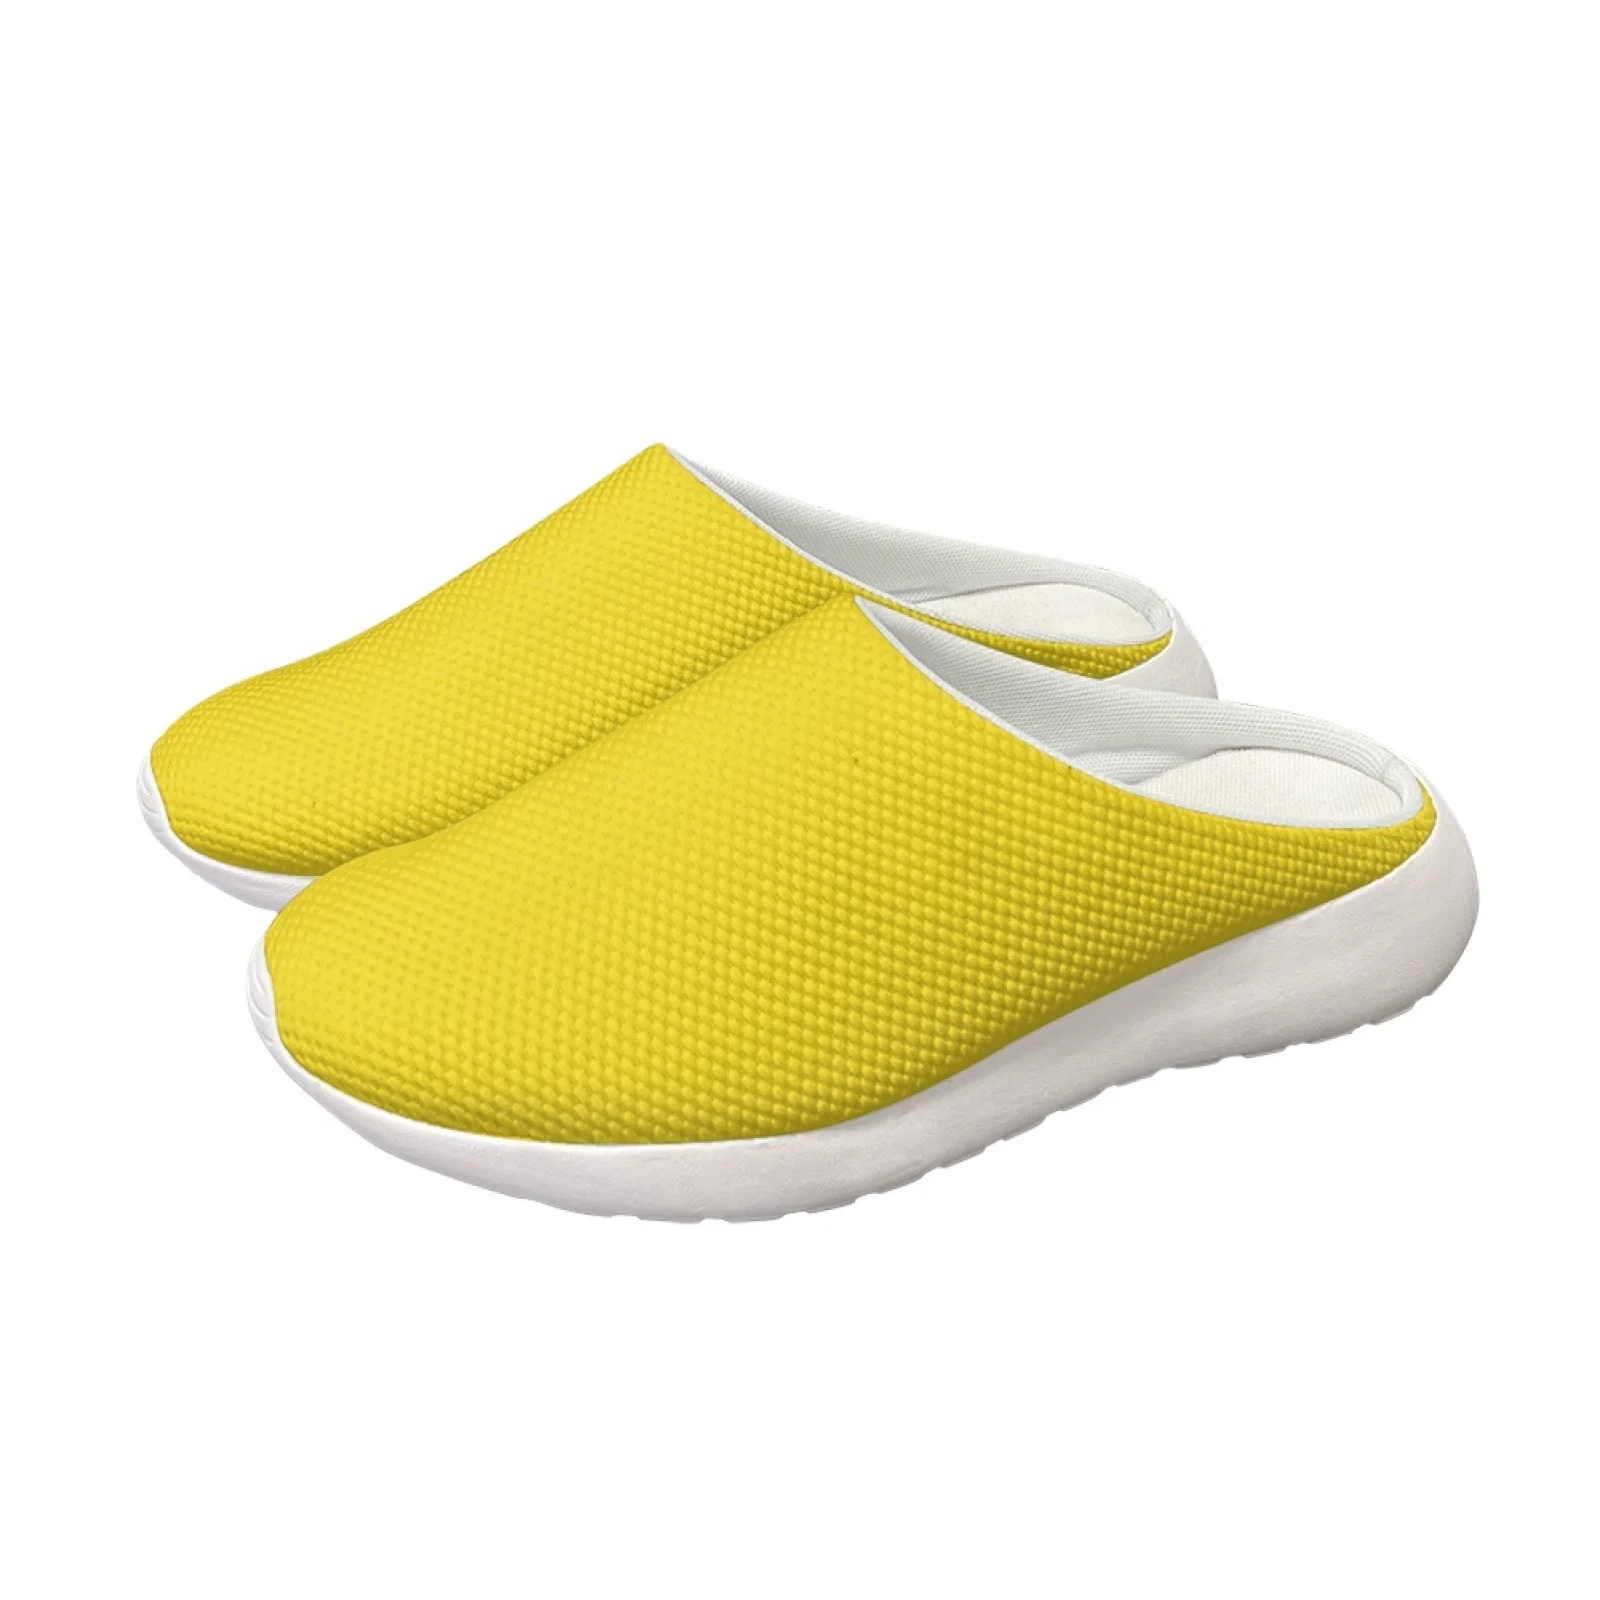 

Solid Color Man Sandals Garden Clogs Mules Sandal Mesh Half Shoes For Men Women Loafers Slippers Casual Shoes Slip On Flats